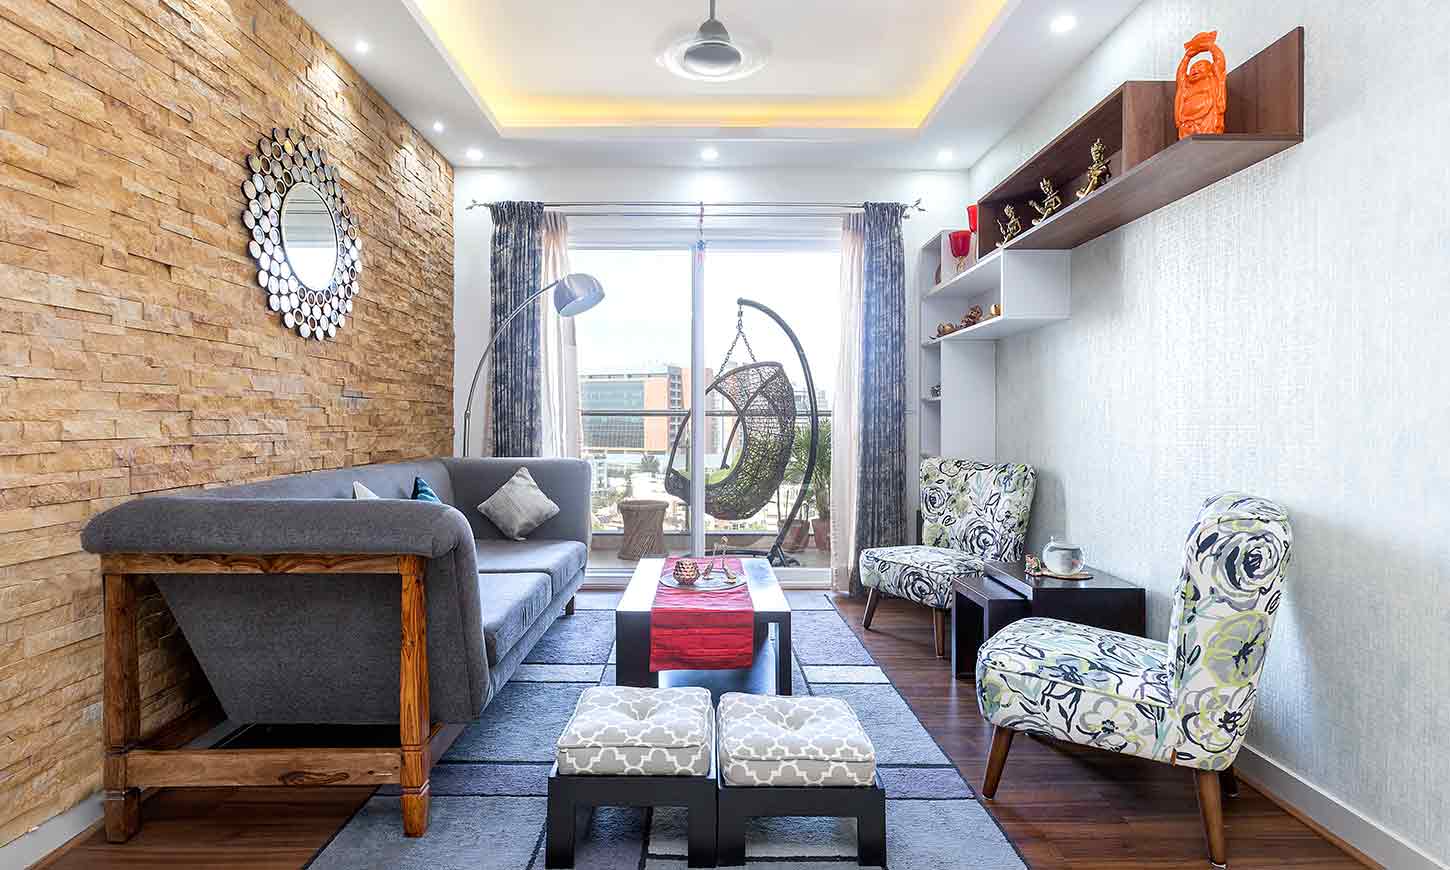 2.5 BHK home designed by Design Cafe best home interior designers in Bangalore